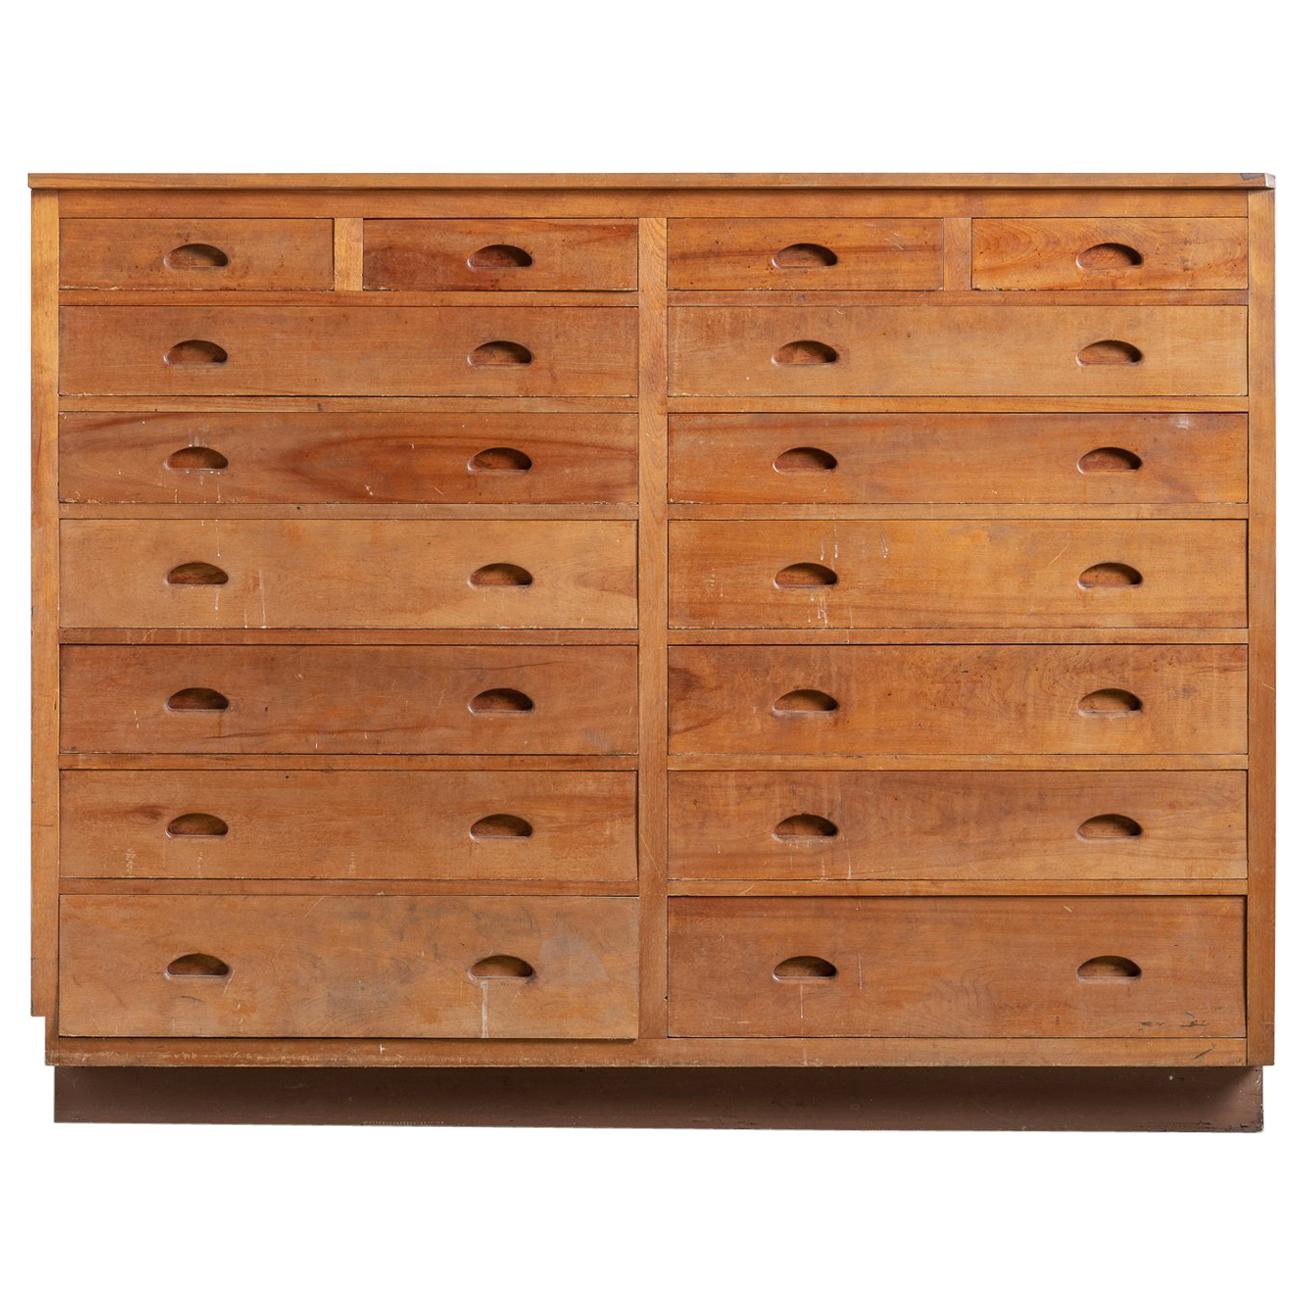 Woodworkers Bank of Drawers, America, 20th Century